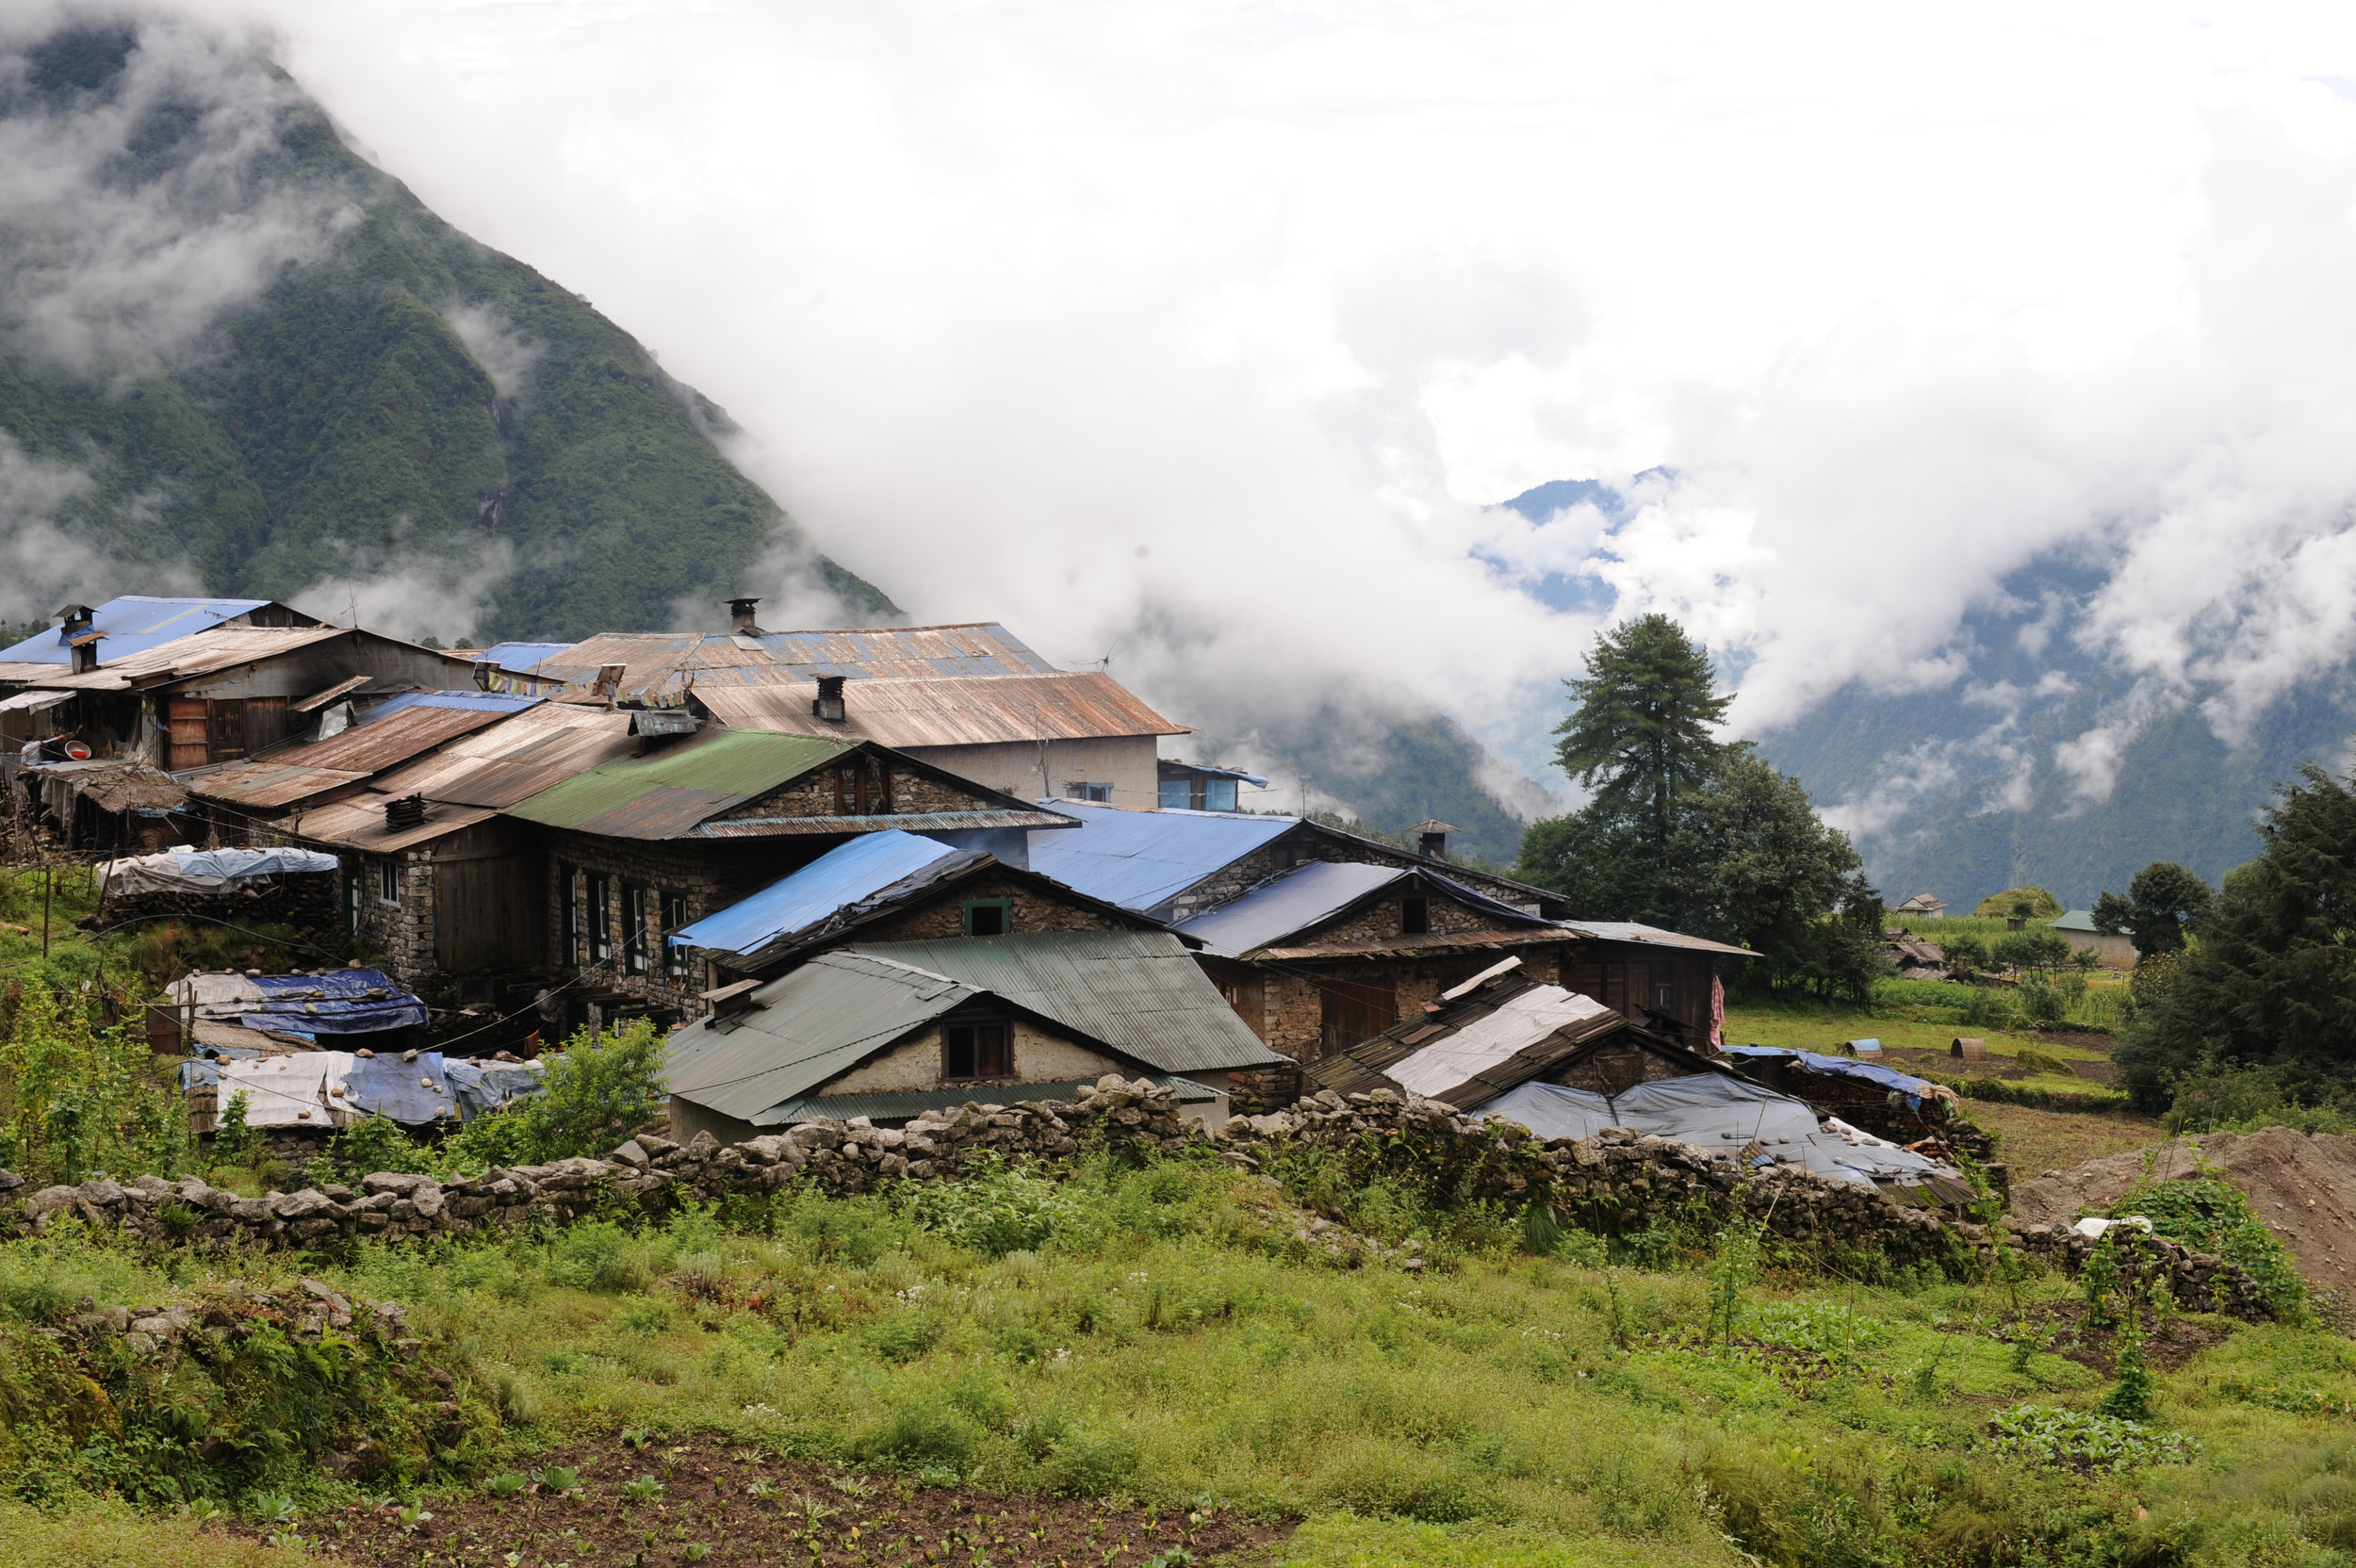 Near Lukla airport, where our expedition begins.